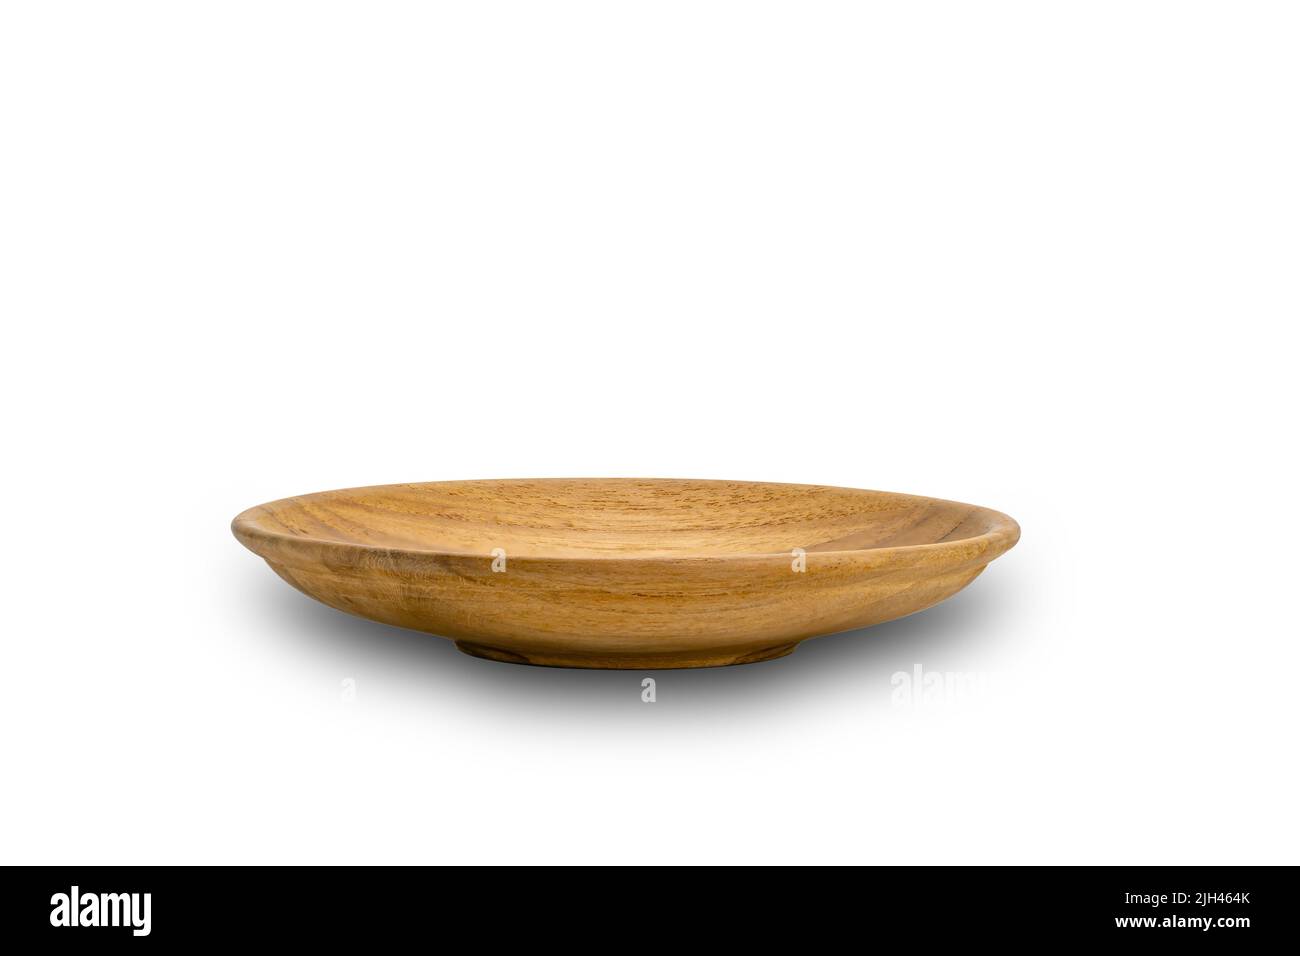 Side view of small wooden plate on white background with clipping path. Stock Photo